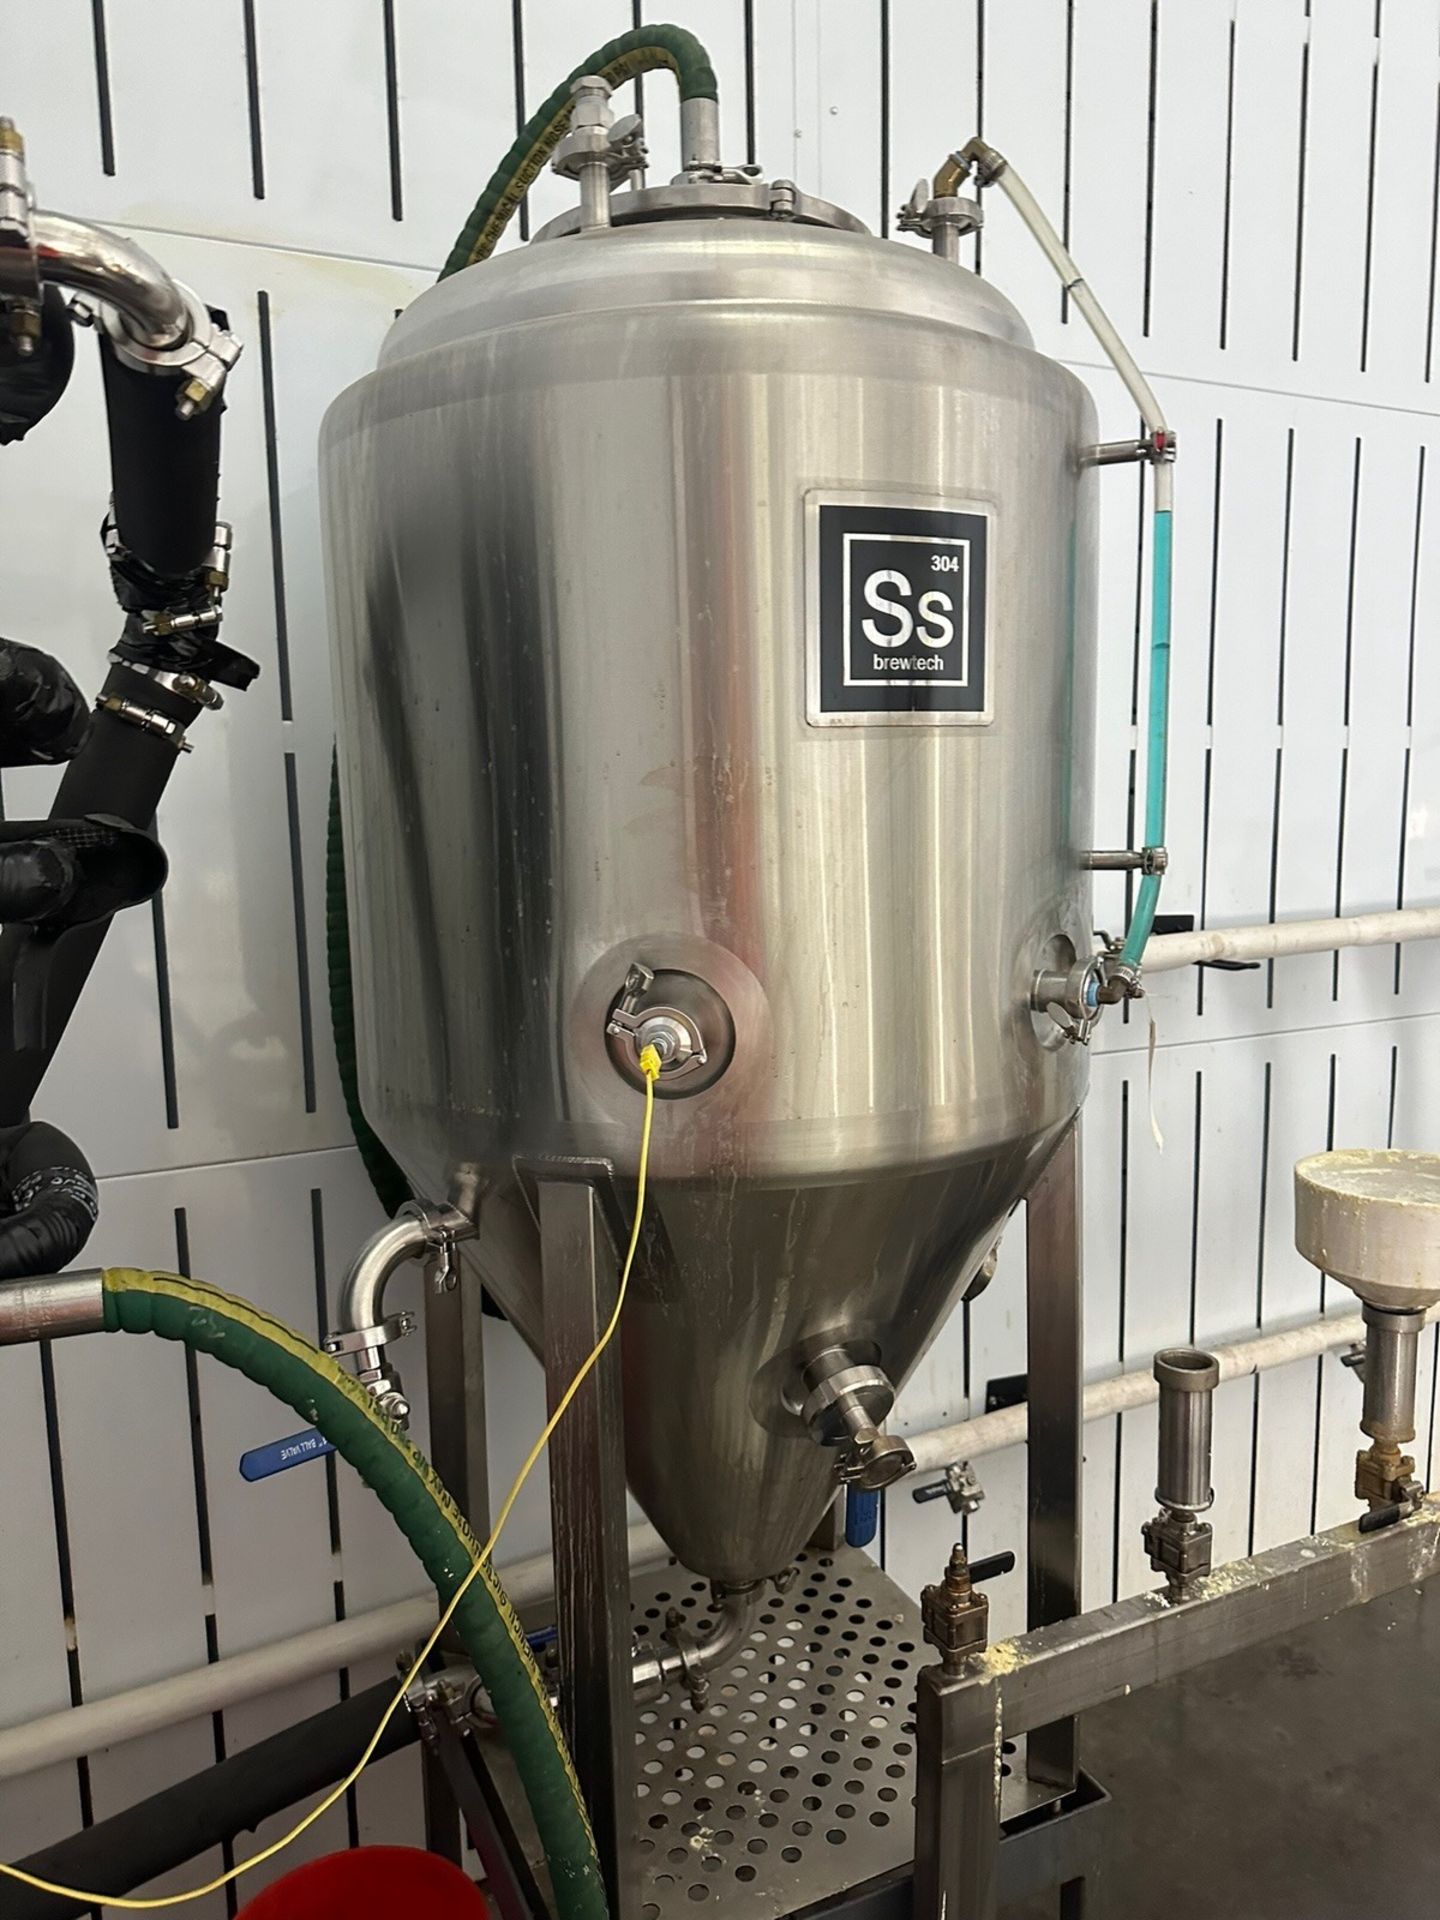 Brew Tech Stainless Steel Vessel | Rig Fee $150 - Image 3 of 3